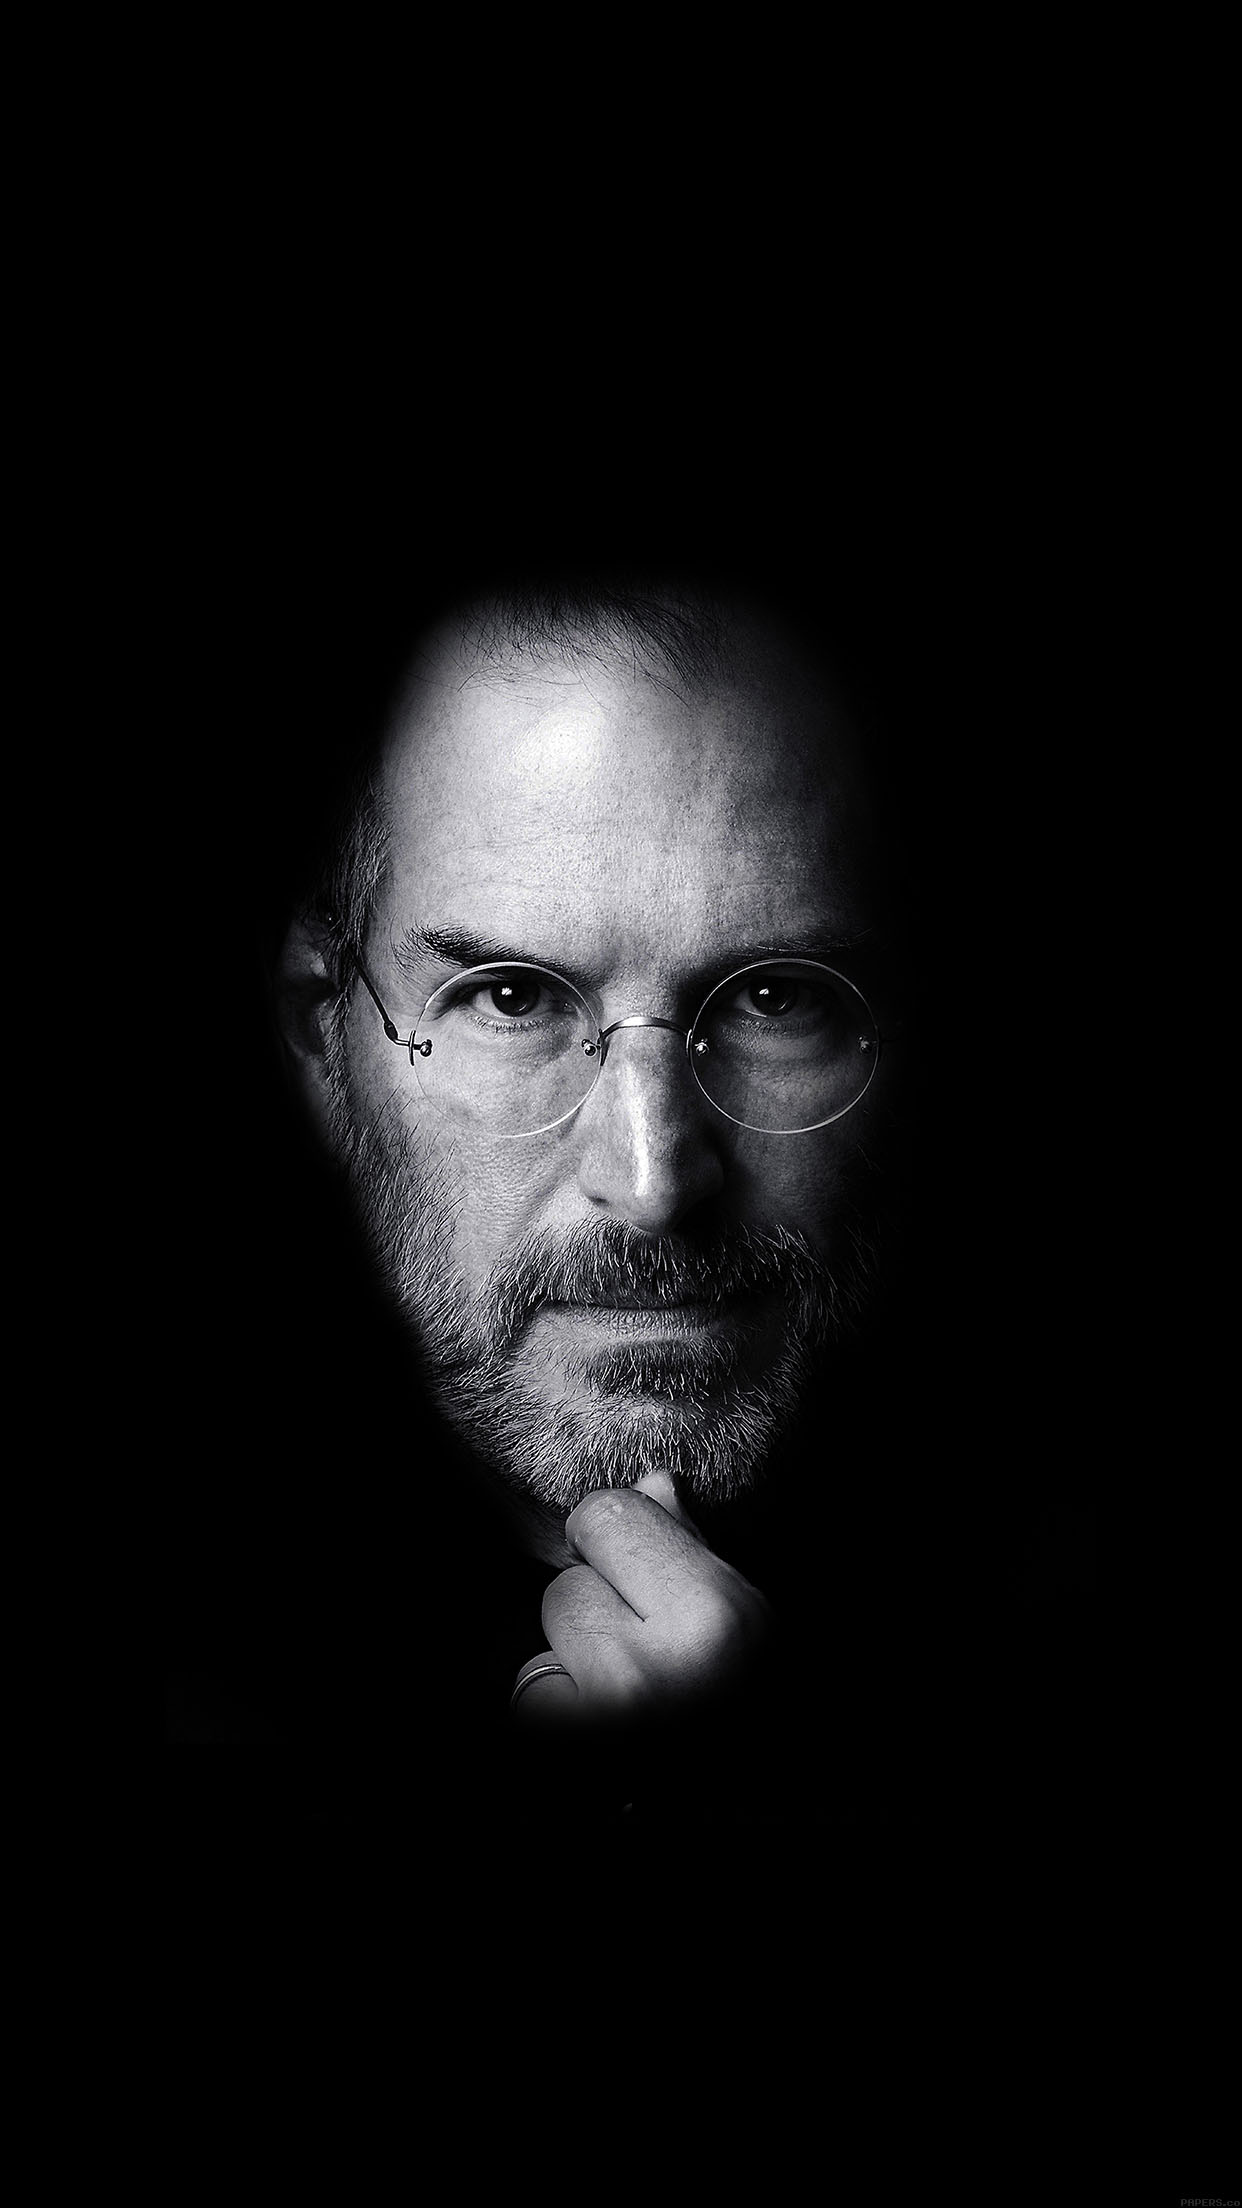 Steve Jobs Tribute Wallpaper For iPhone And Plus